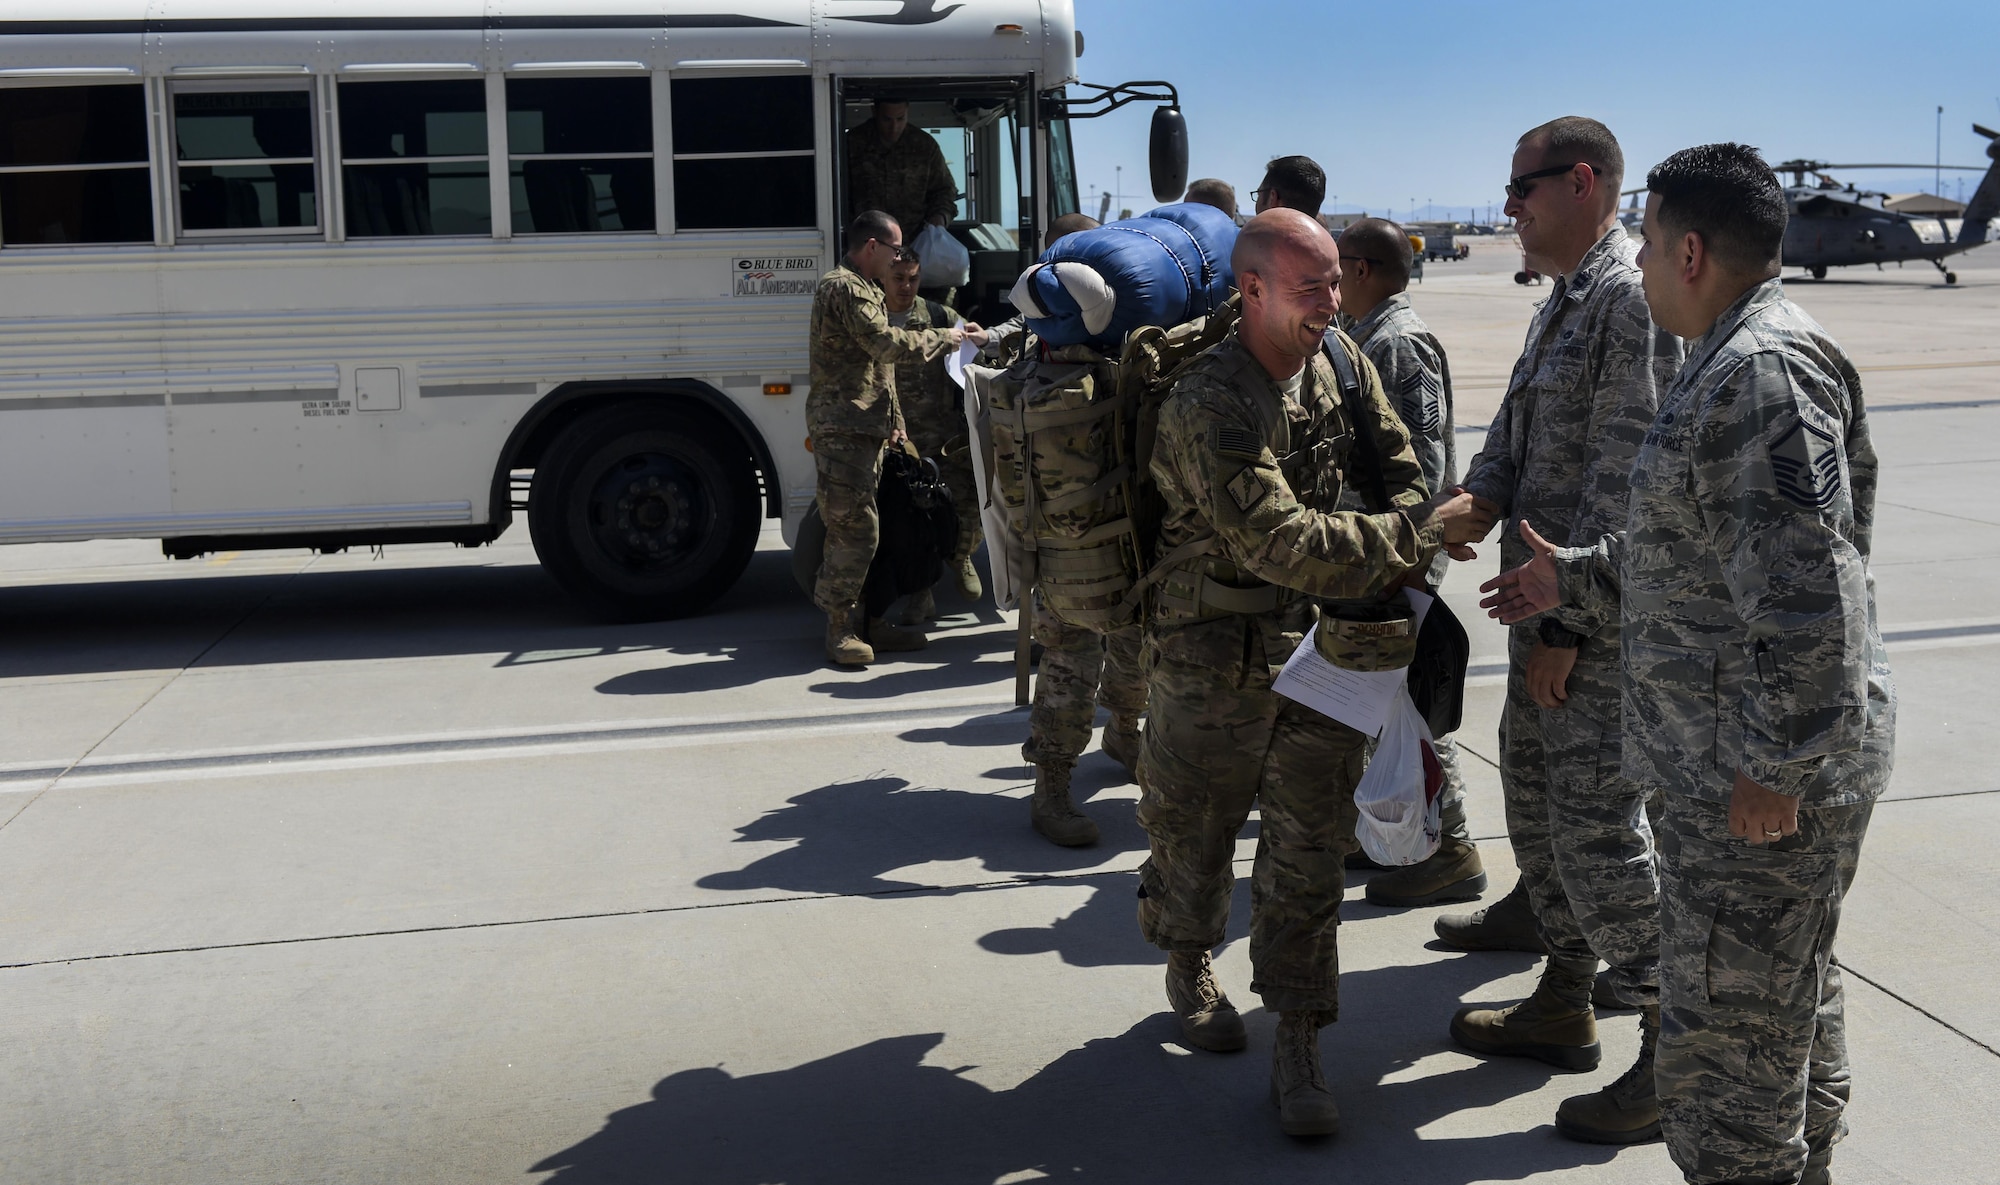 Airmen from the 66th Rescue Squadron and 823rd Air Maintenance Squadron shake the hands as they disembark from a bus after returning from deployment at Nellis Air Force
Base, Nev., June 7. The deployment began approximately four months ago as members of the 823rd MXS and 66th RQS traveled to Afghanistan. (U.S. Air Force photo by Airman 1st Class Kevin Tanenbaum)